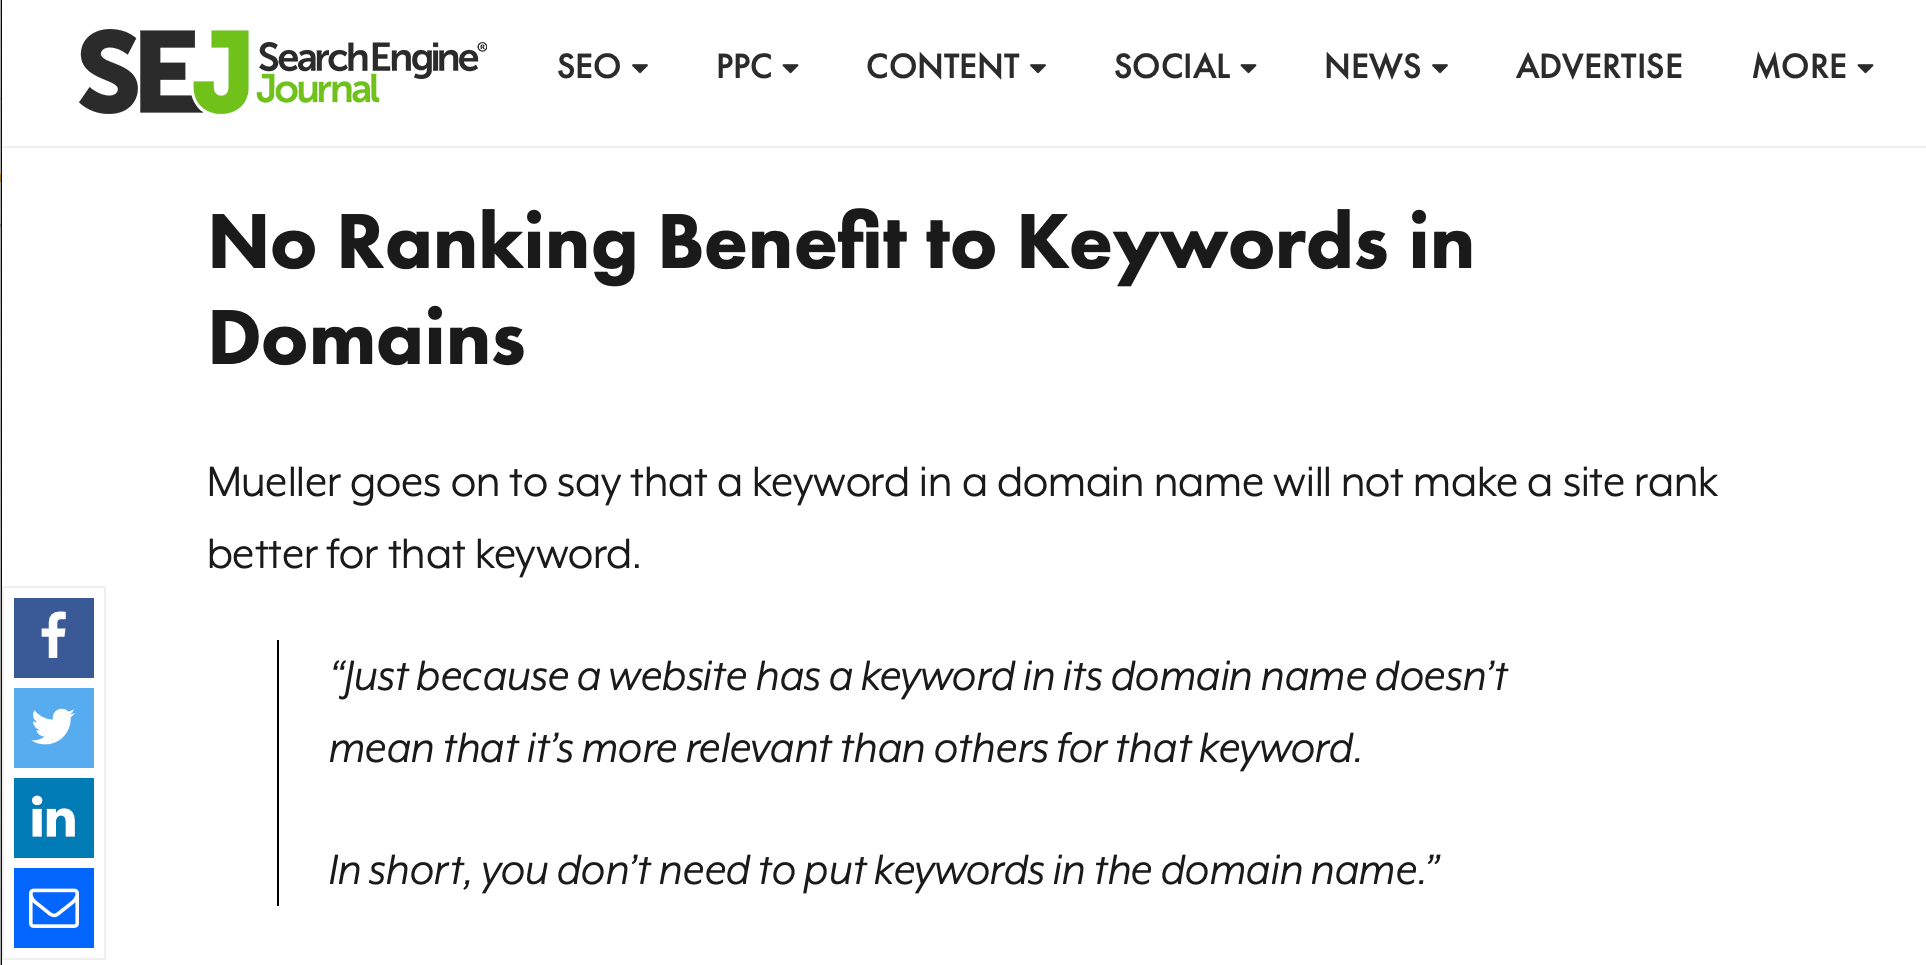 Google continues to emphasize that keywords in domains do nothing for SEO